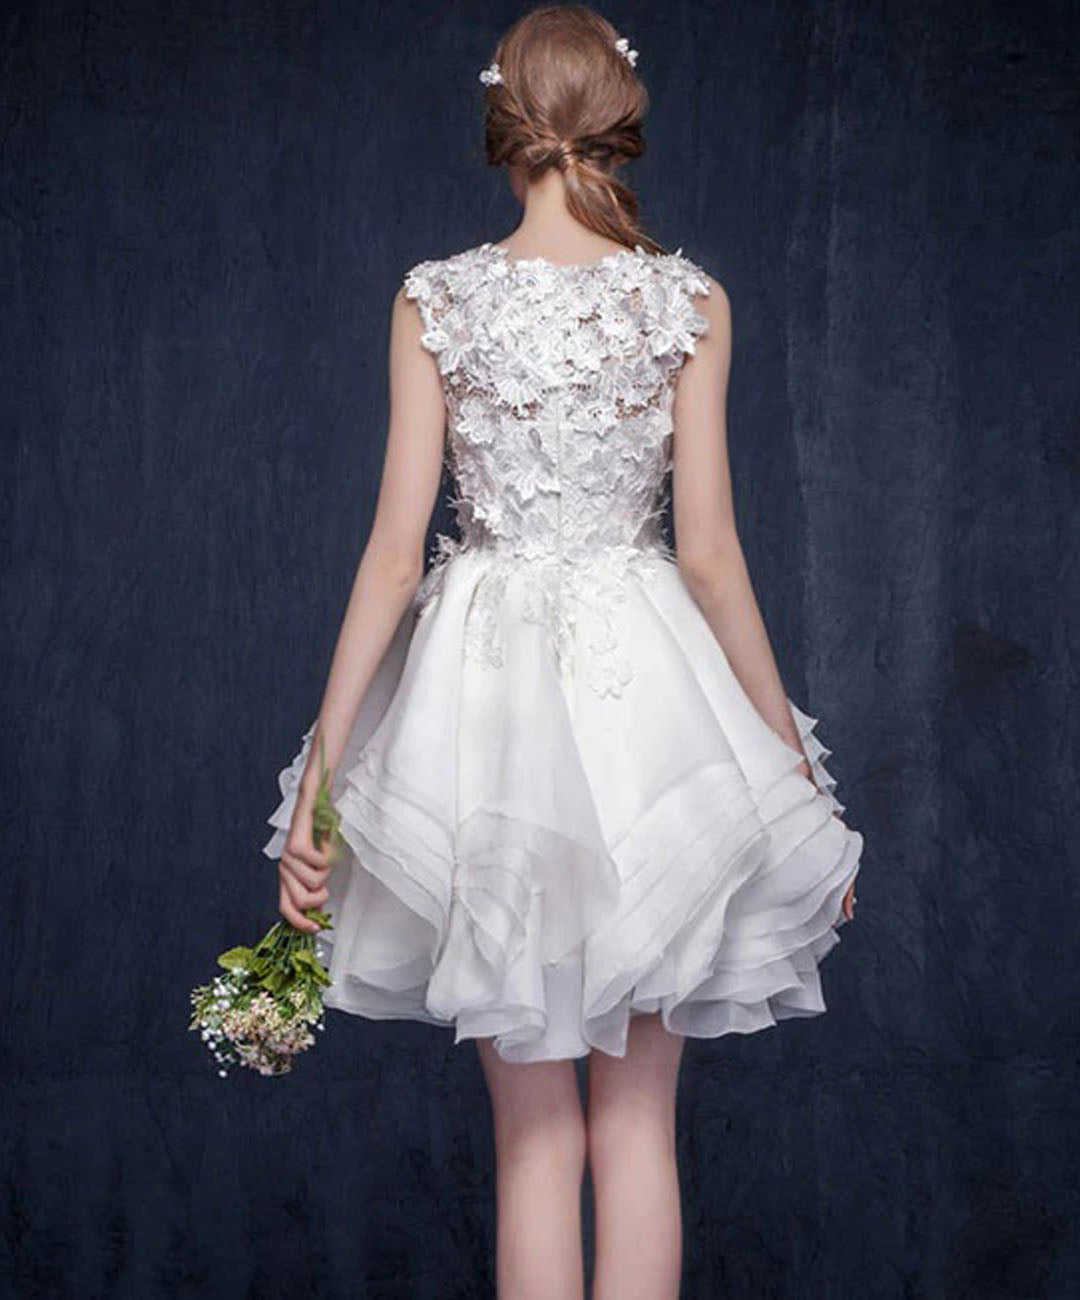 Elegant A-line Lace Tulle Short Homecoming Dress,WD173